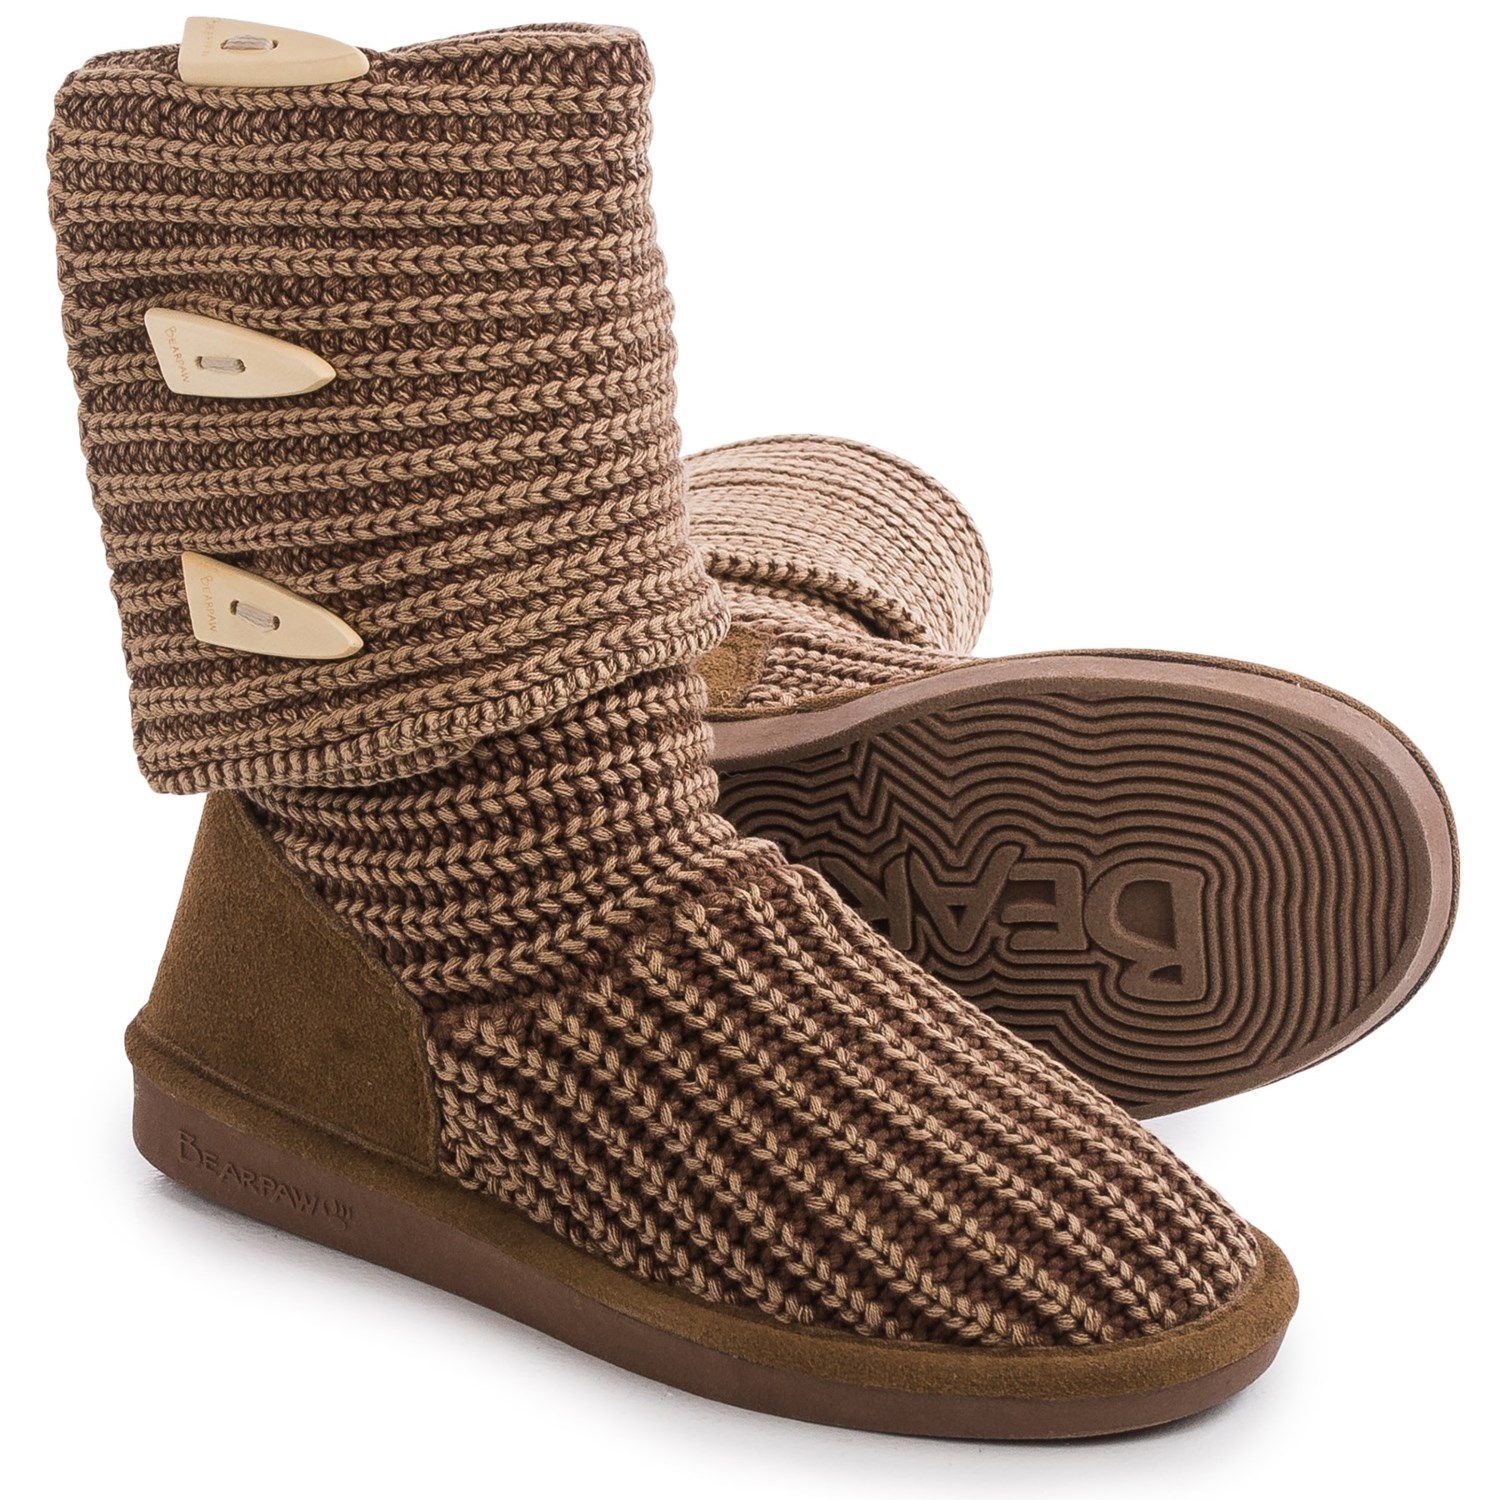 Bearpaw Tall Knit Boots (For Women) Save 50